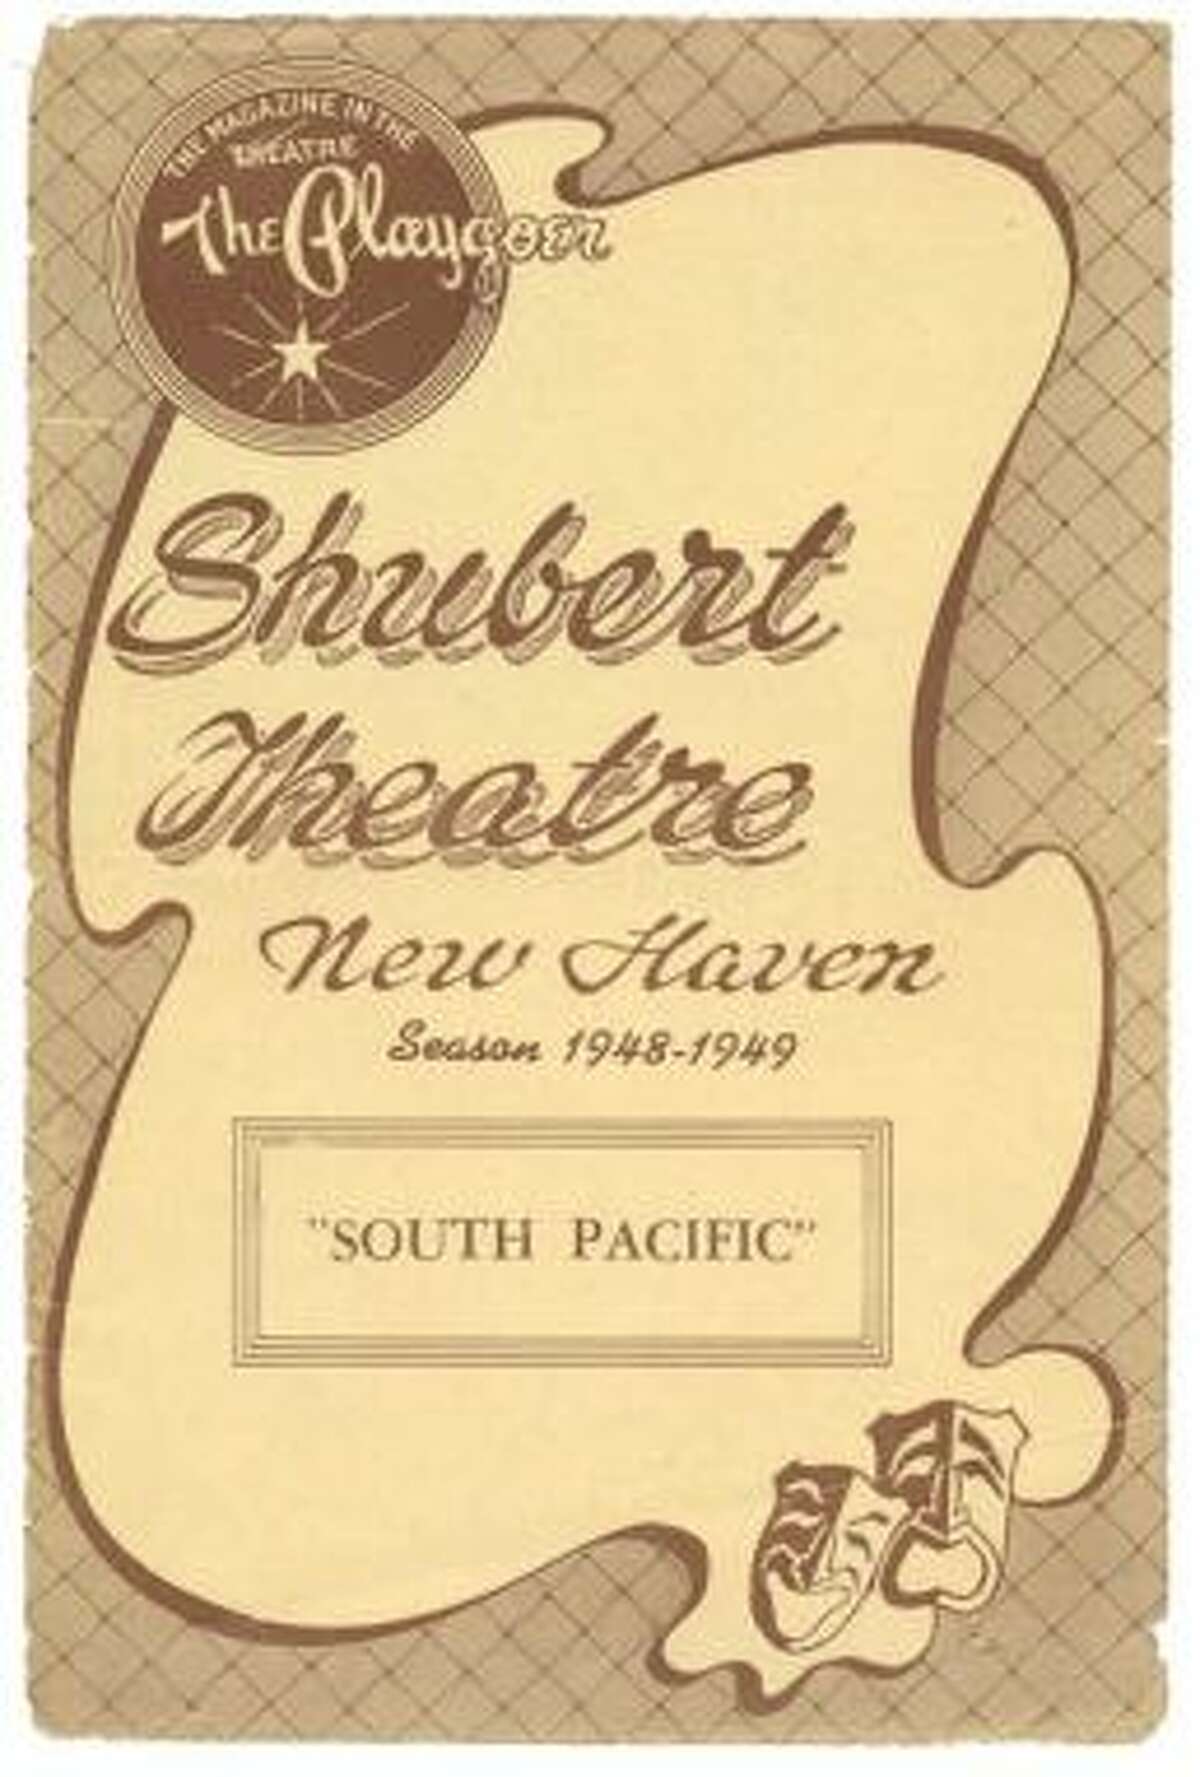 The "South Pacific" playbill, 1949